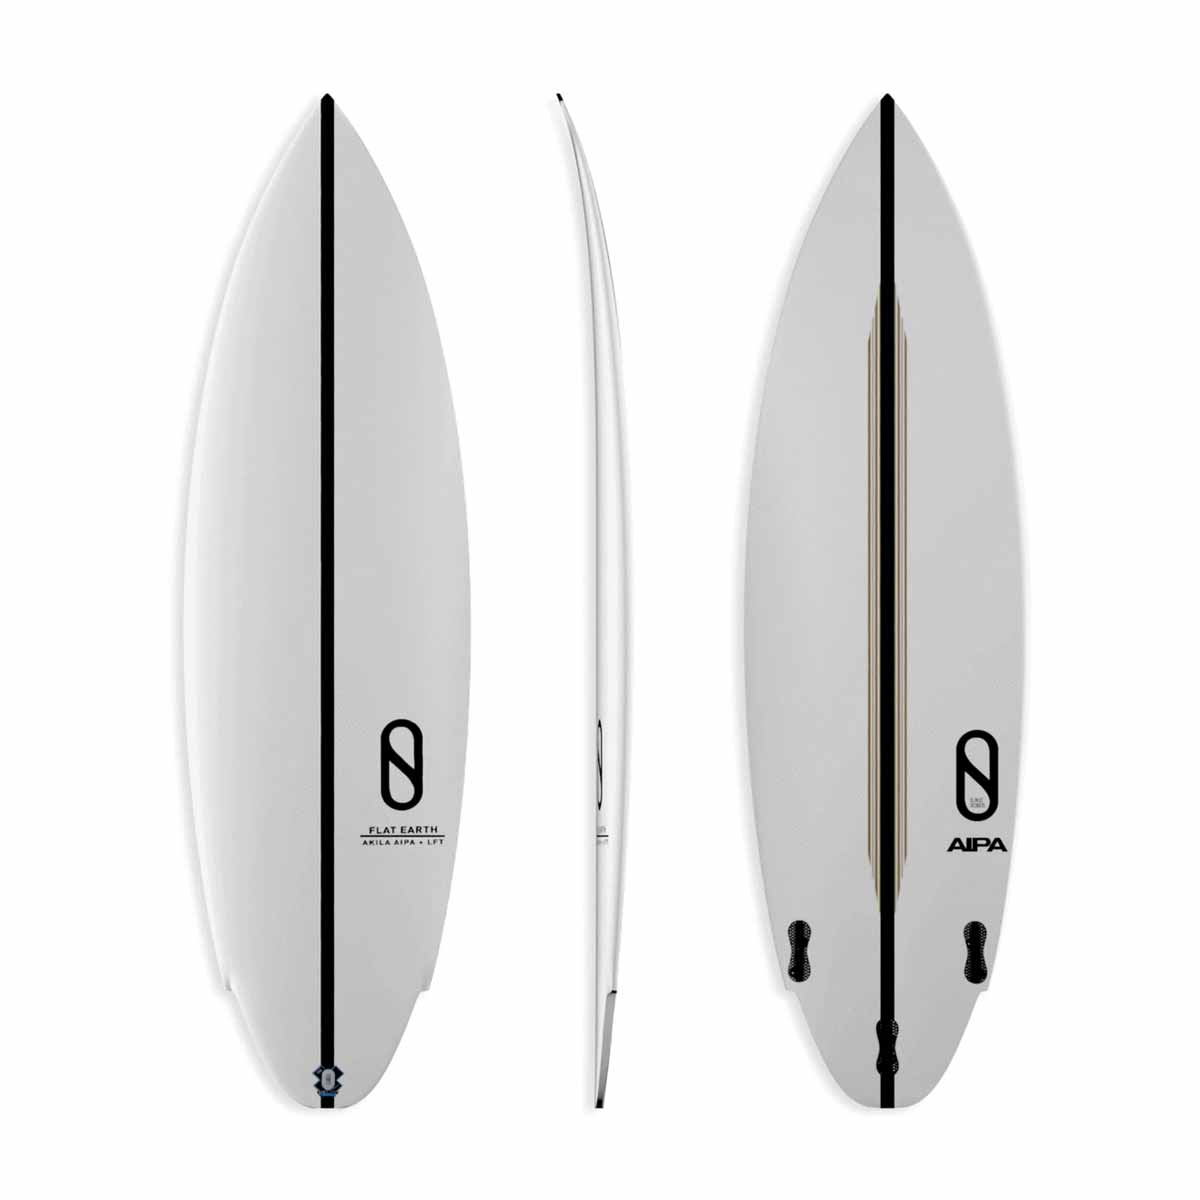 Slater Designs Flat Earth Surfboard – 5'5 to 6'4